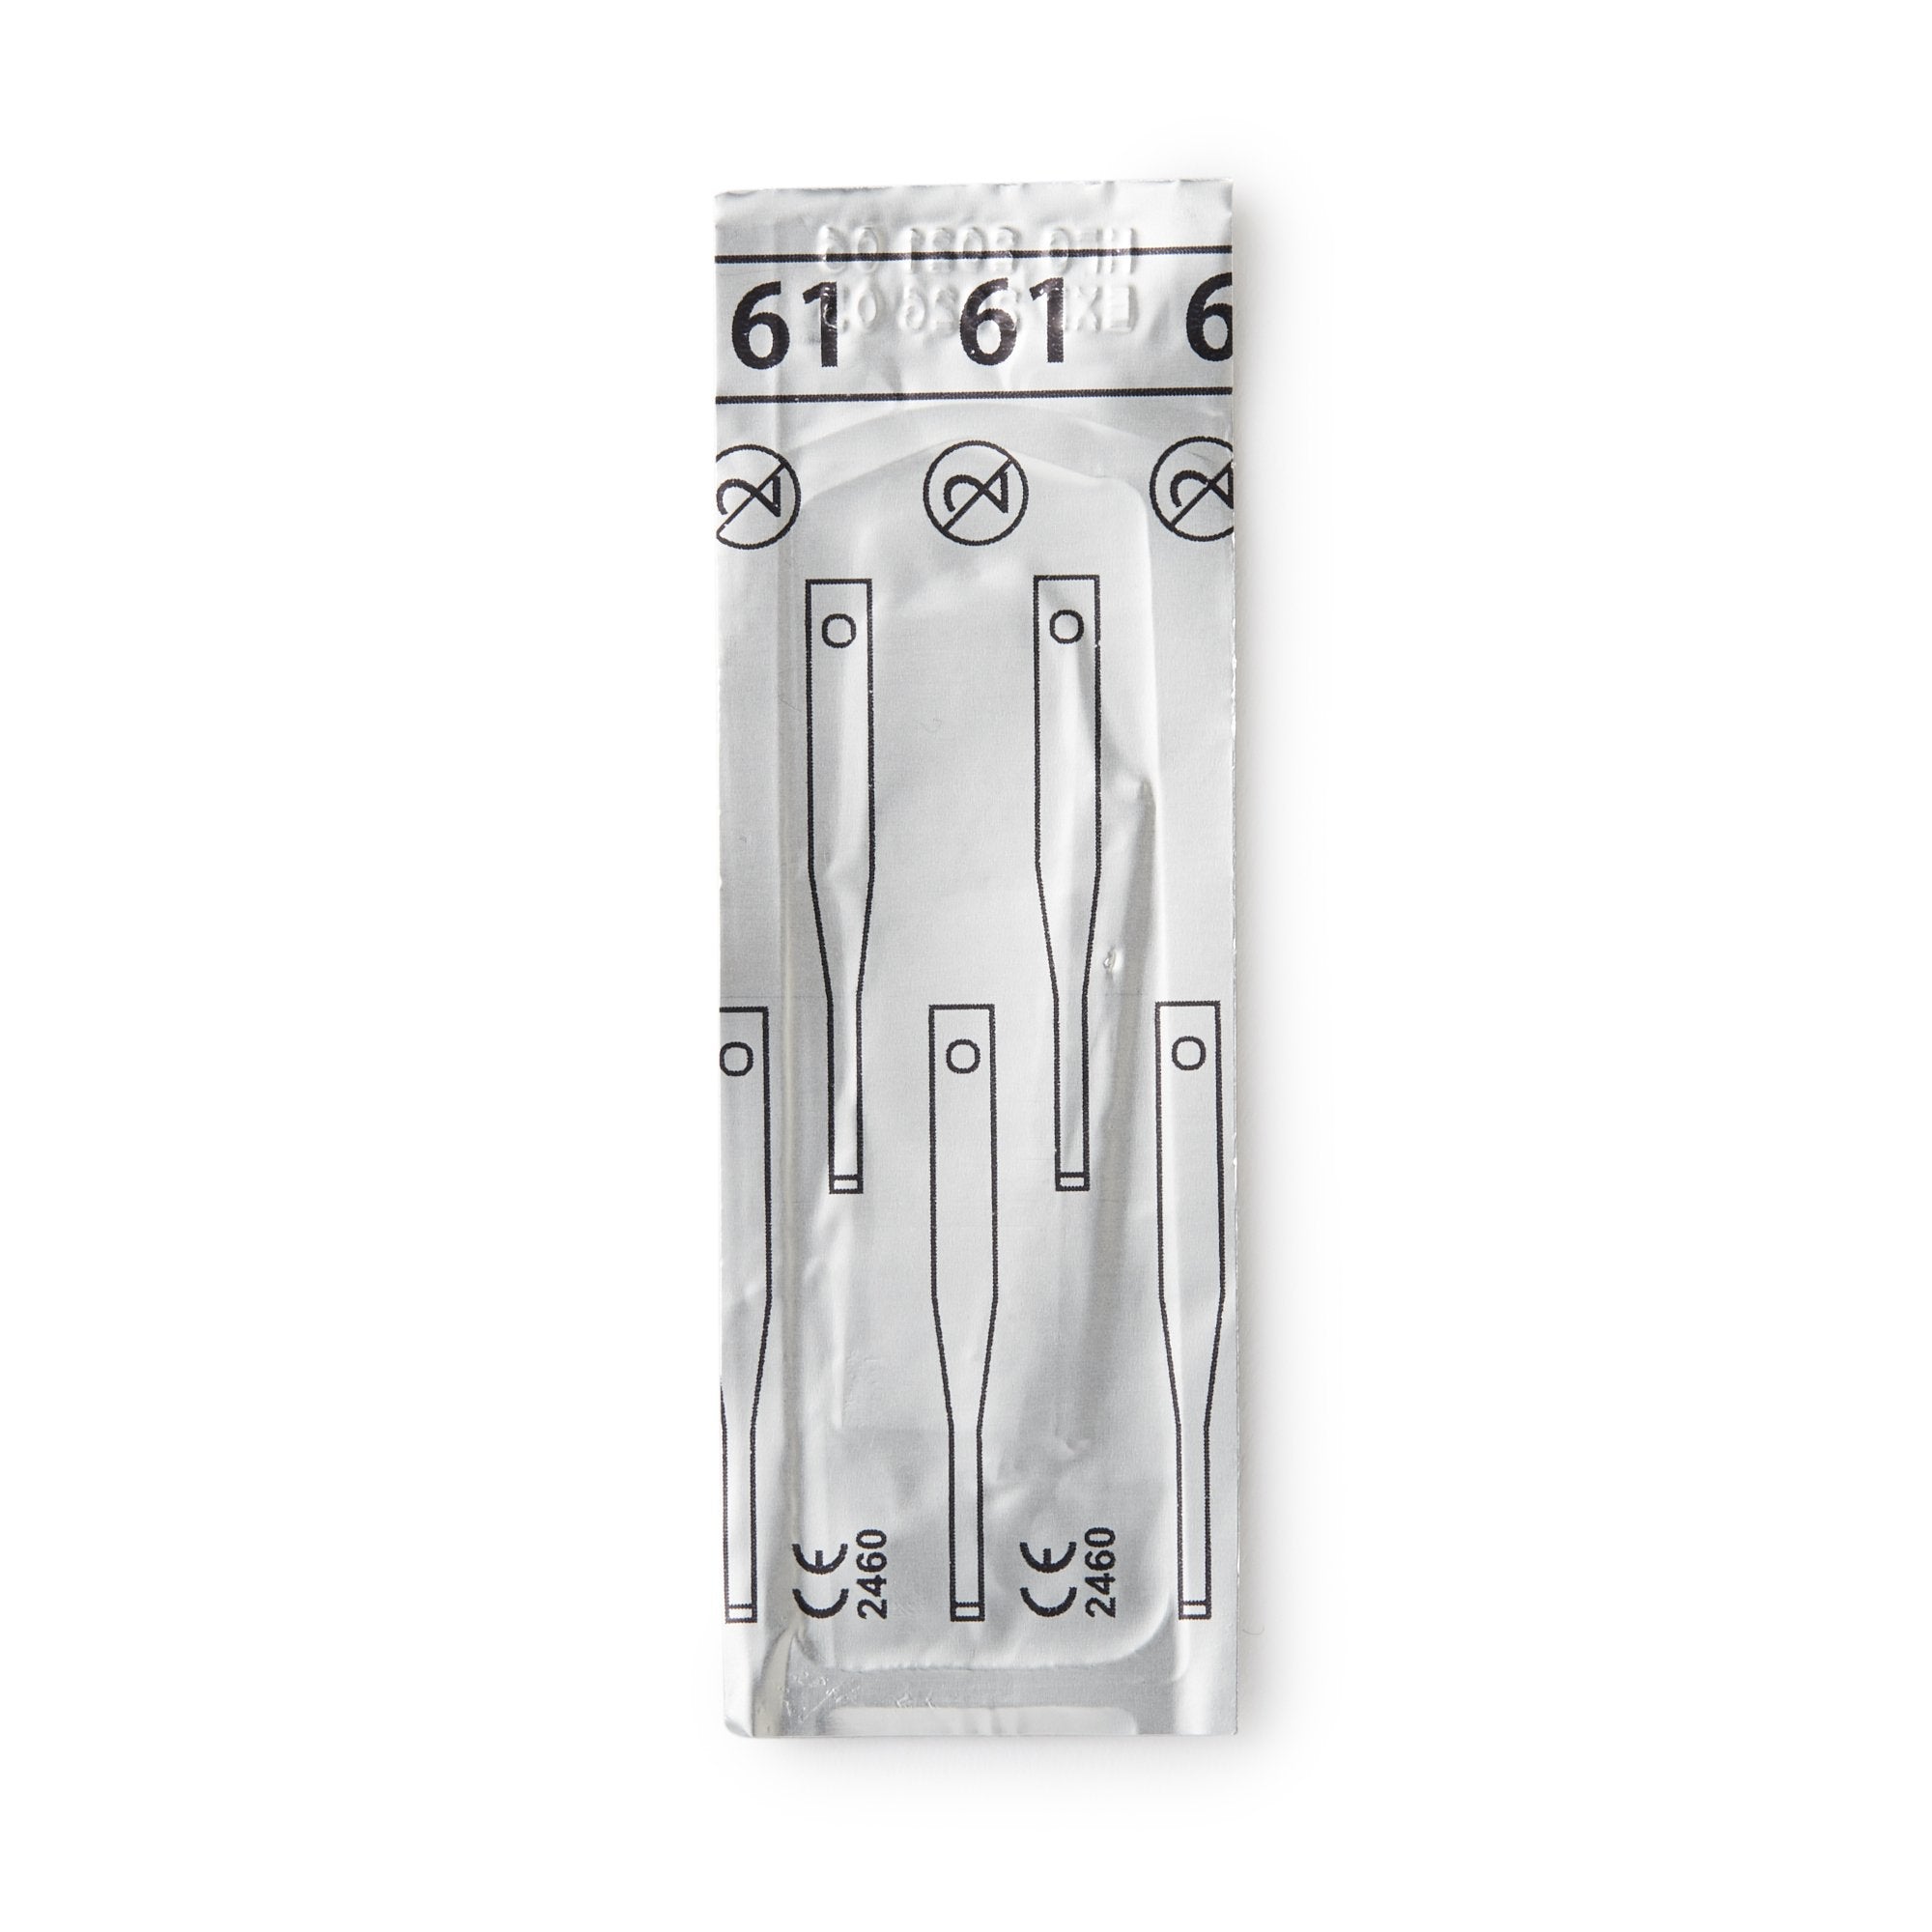 Surgical Blade McKesson Carbon Steel No. 61 Sterile Disposable Individually Wrapped